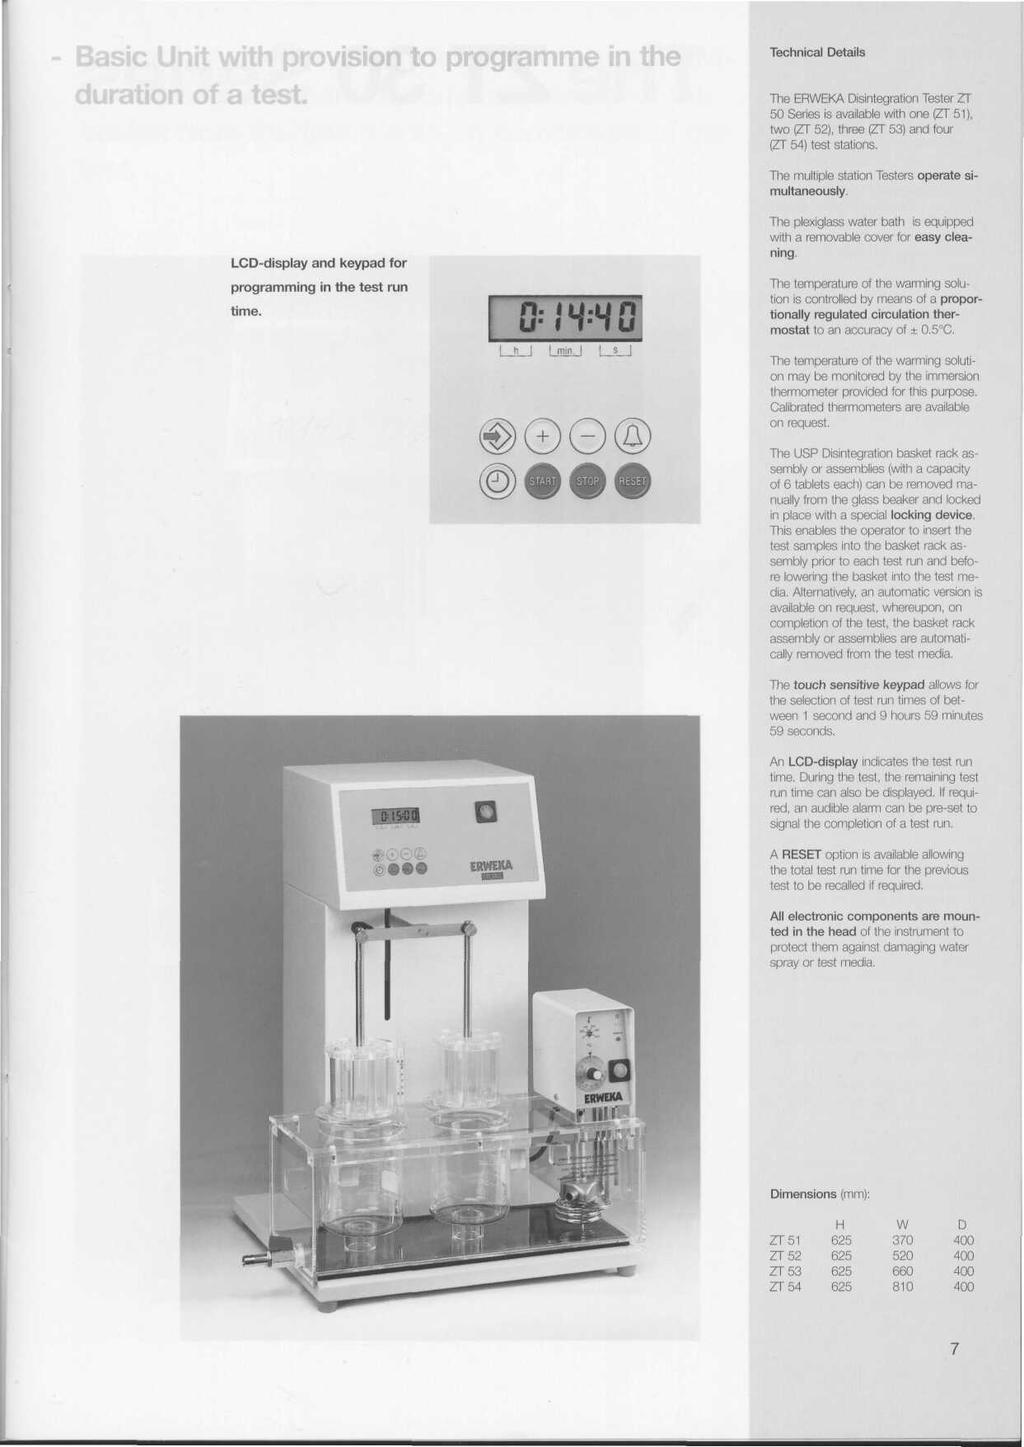 vision to The ERWEKA Disintegration Tester ZT 50 Series is available with one (ZT 51), two (ZT 52), three (ZT 53) and four (ZT 54) test stations. The multiple station Testers operate simultaneously.